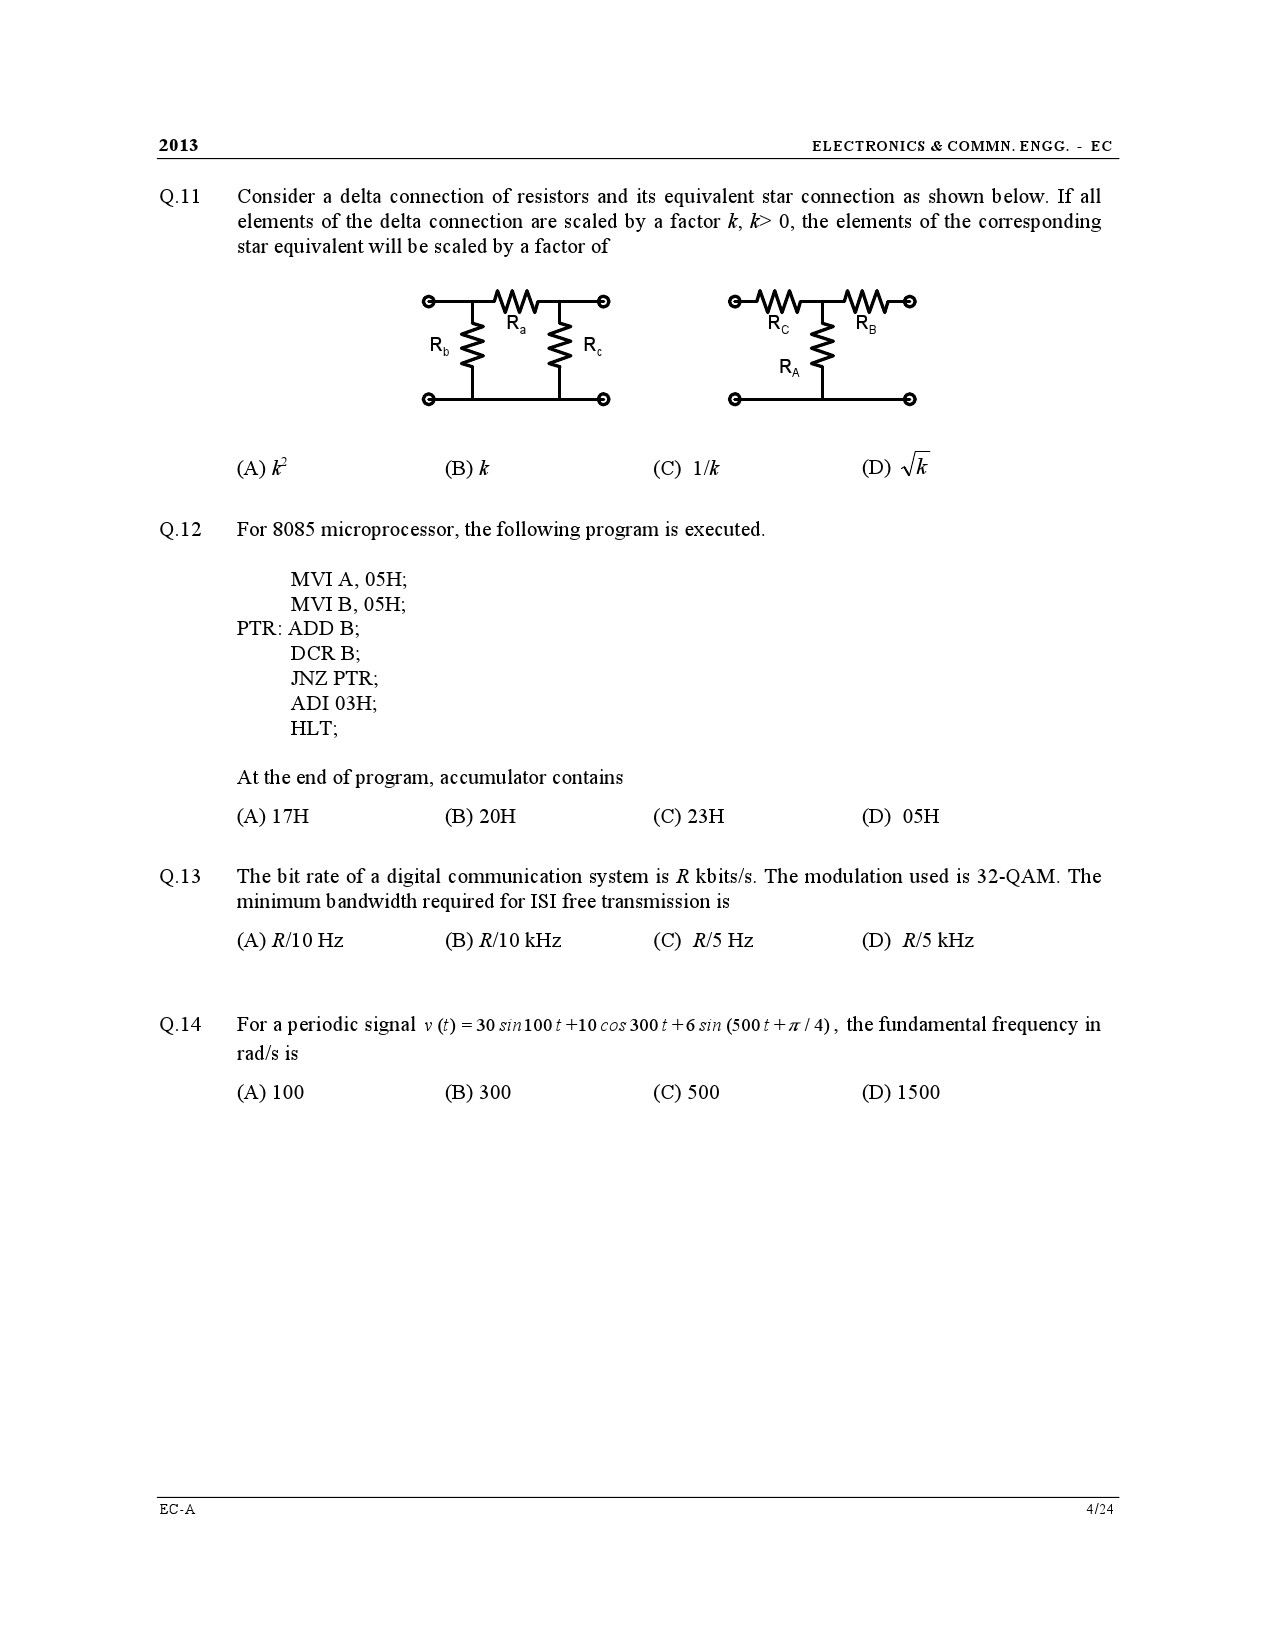 GATE Exam Question Paper 2013 Electronics and Communication Engineering 4